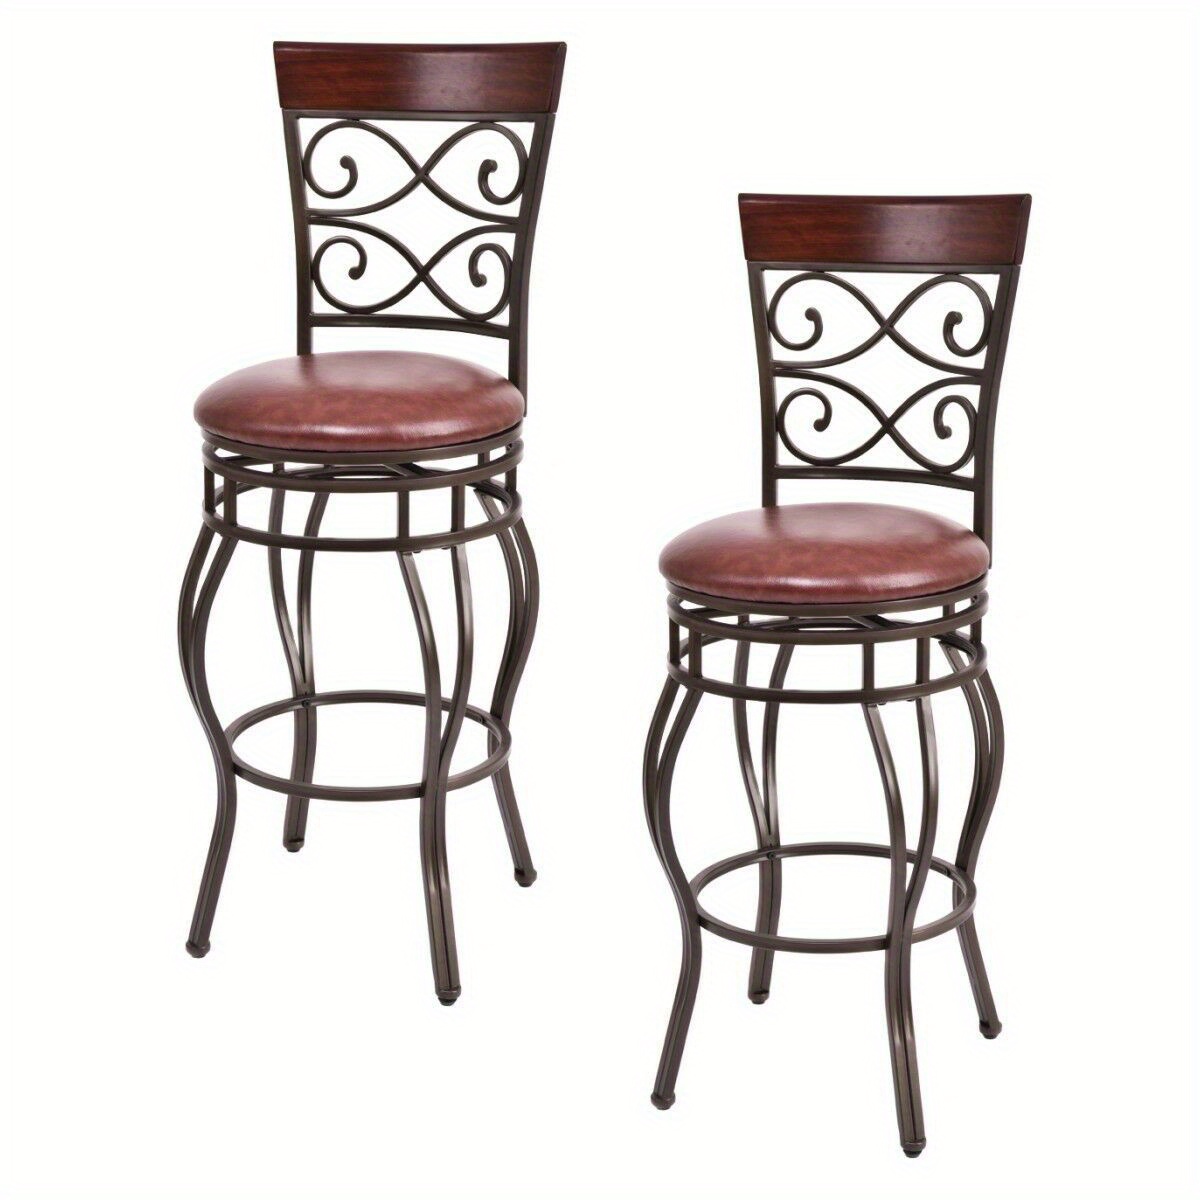 

Gymax Set Of 2 Vintage Bar Stools Swivel Padded Seat Bistro Dining Kitchen Pub Chair